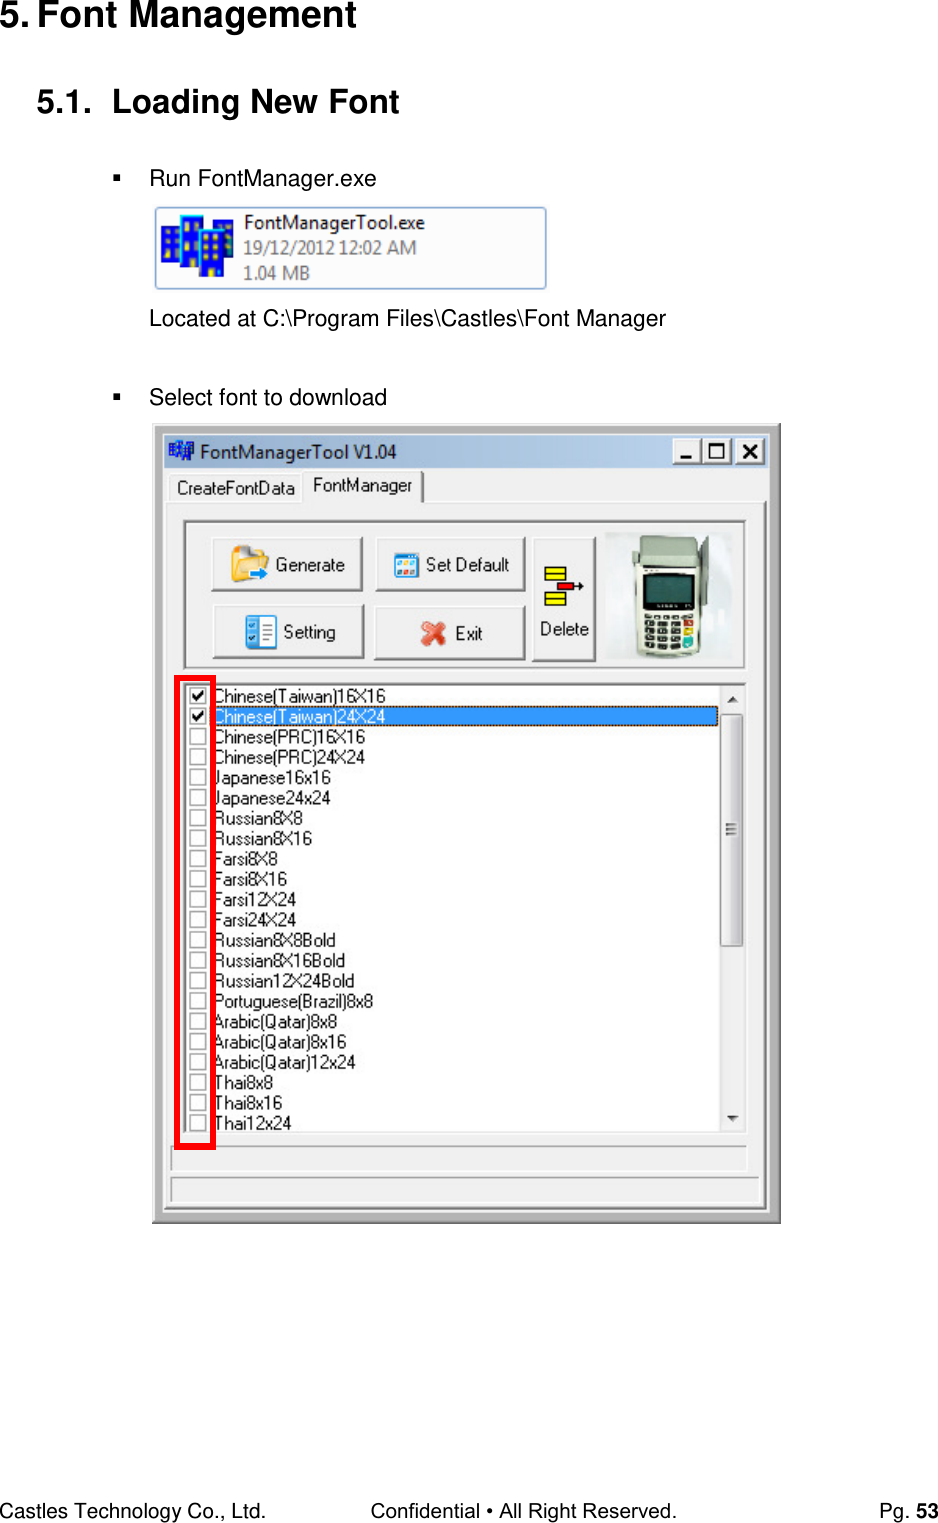 Castles Technology Co., Ltd. Confidential • All Right Reserved.  Pg. 53 5. Font Management 5.1.  Loading New Font   Run FontManager.exe  Located at C:\Program Files\Castles\Font Manager    Select font to download         